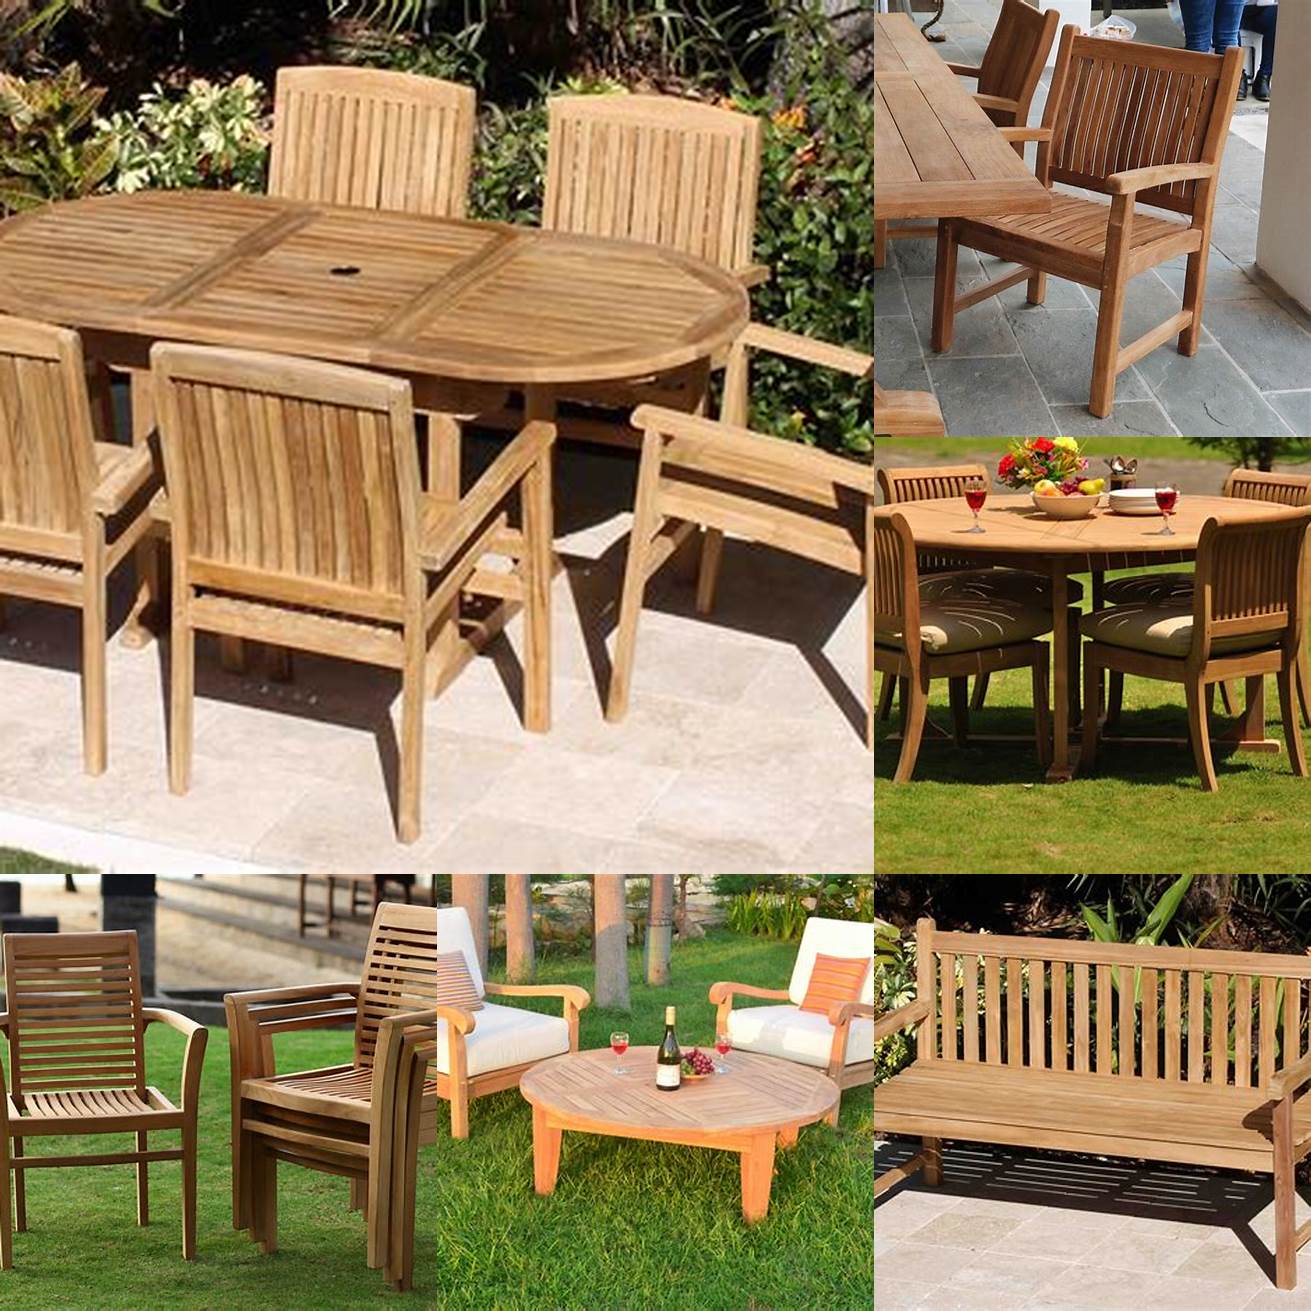 Teak Furniture with Other Materials